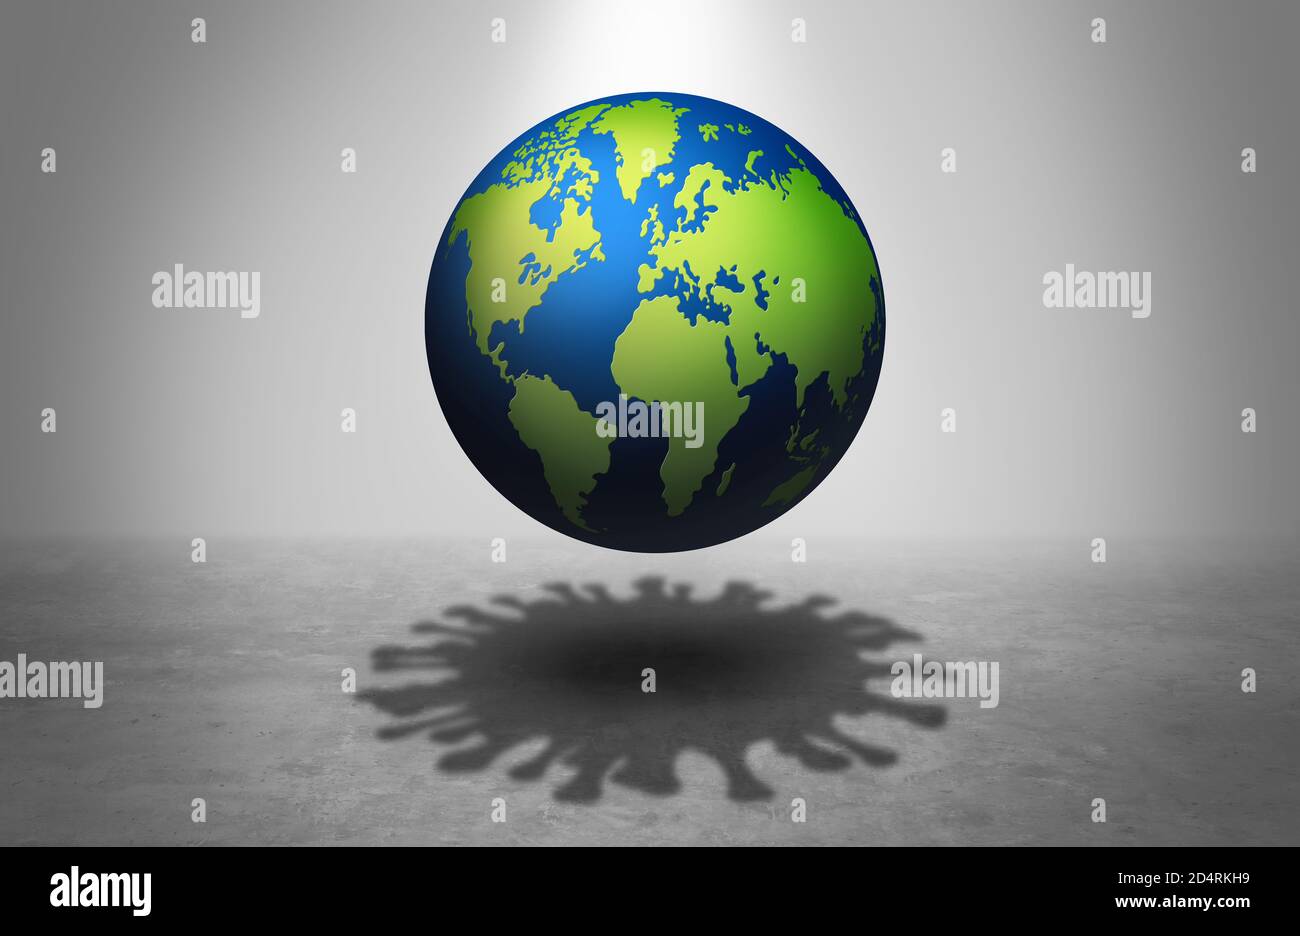 Planet earth virus as the world with a disease cell cast shadow as a health and medicine symbol for global illness risk and pandemic outbreak. Stock Photo